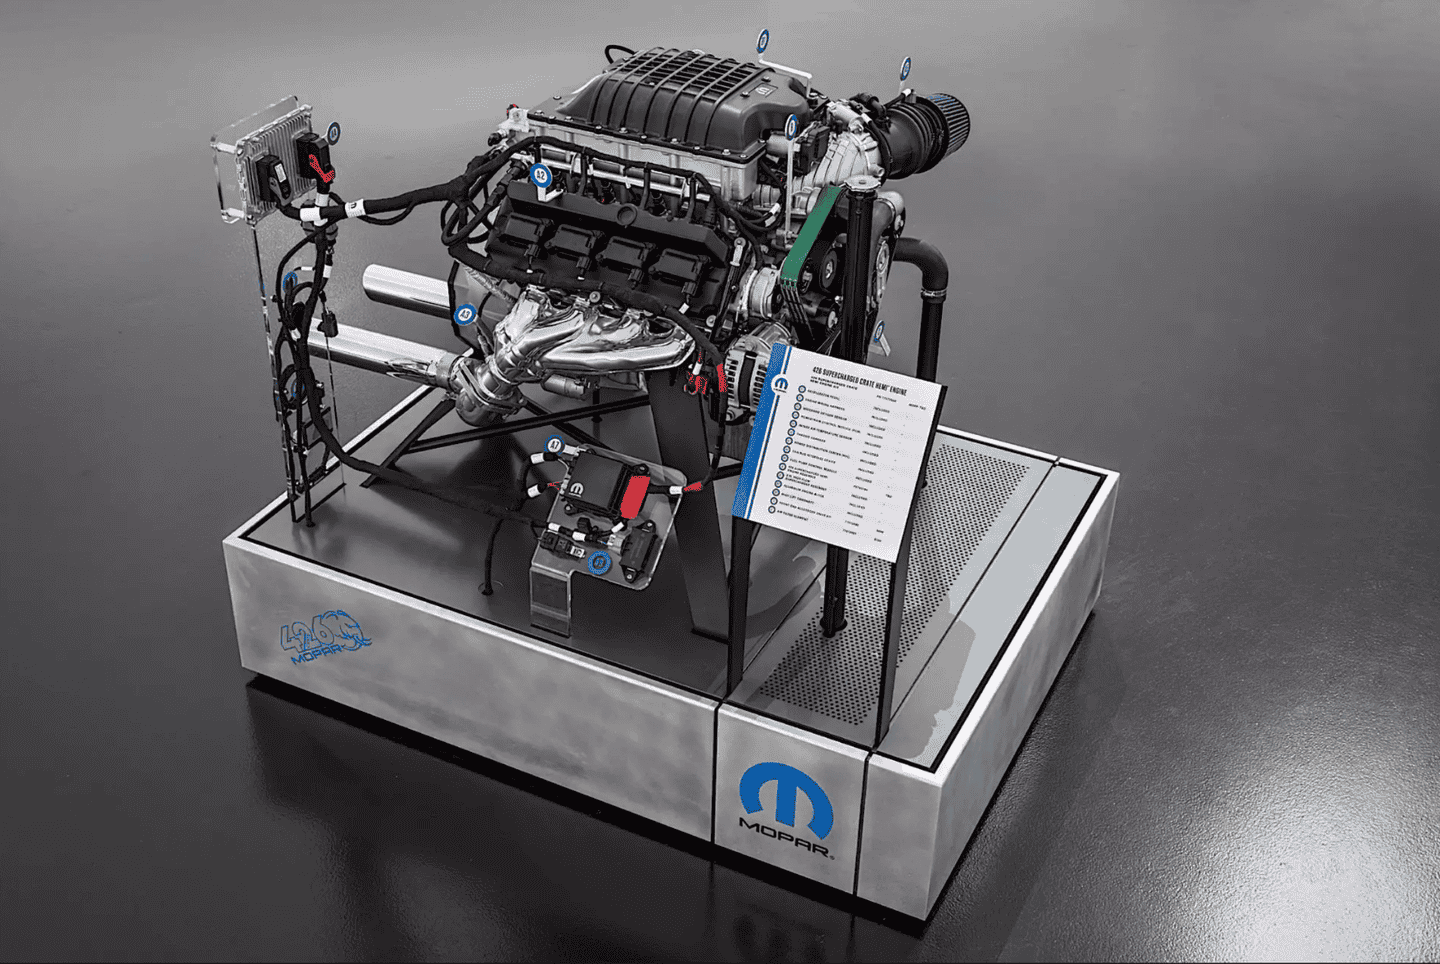 1,000-HP ‘Hellephant’ 426 Hemi Crate Engine From Mopar Costs $30K, and You Can Order It Now